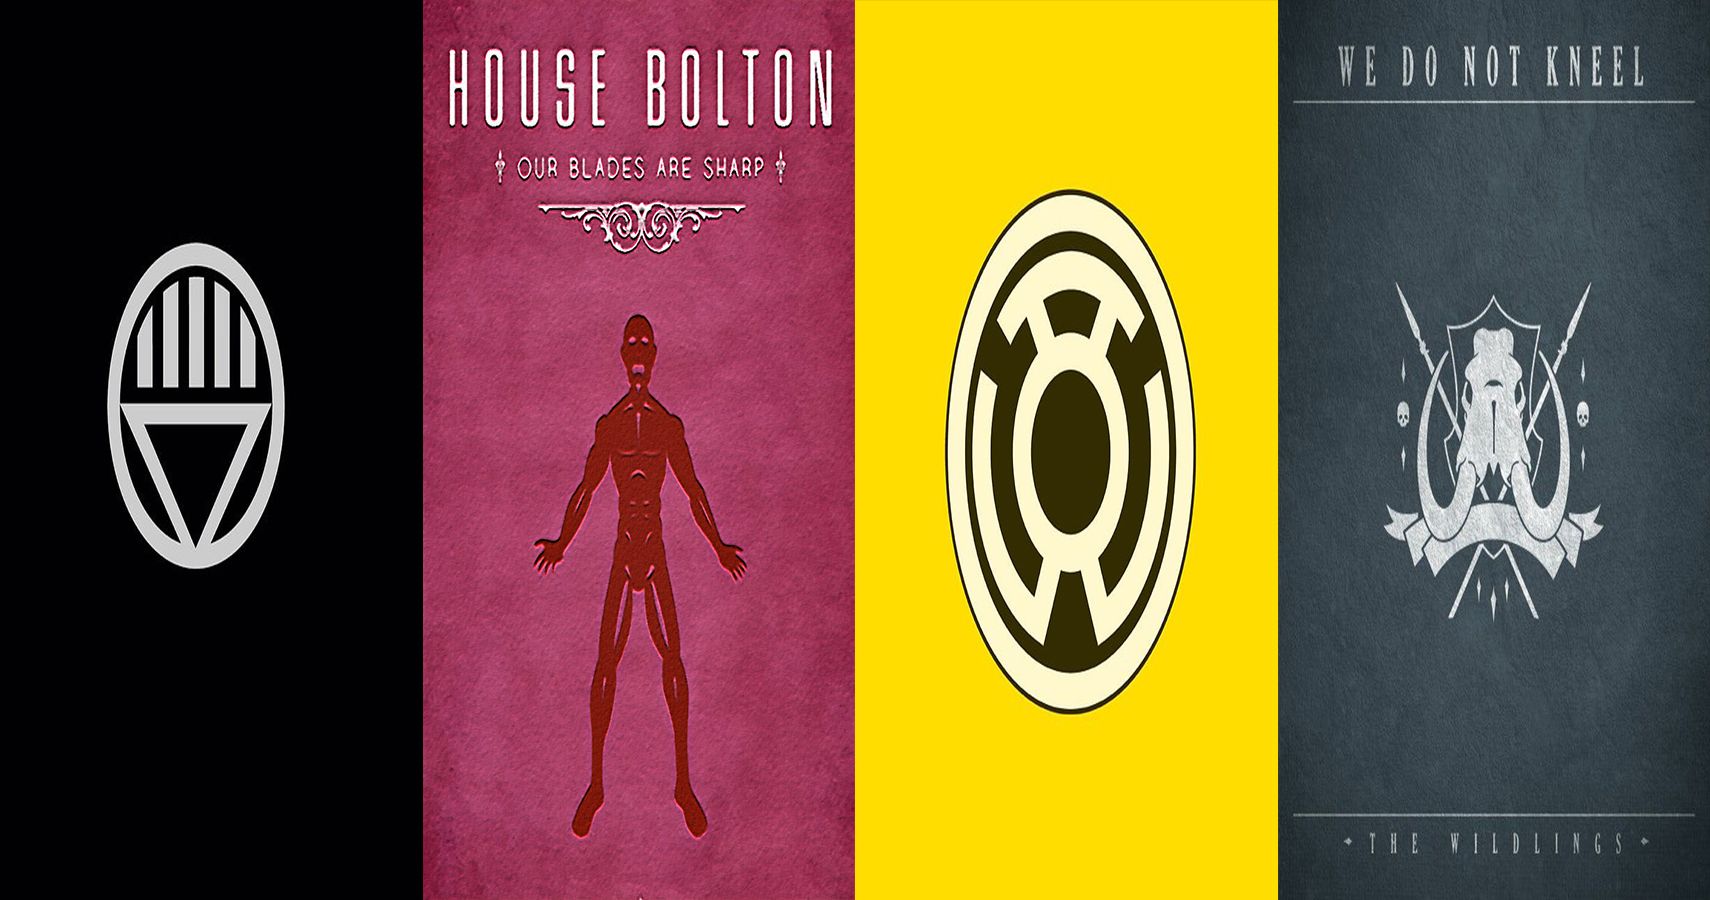 10 DC Villains Sorted Into Their Game of Thrones Houses